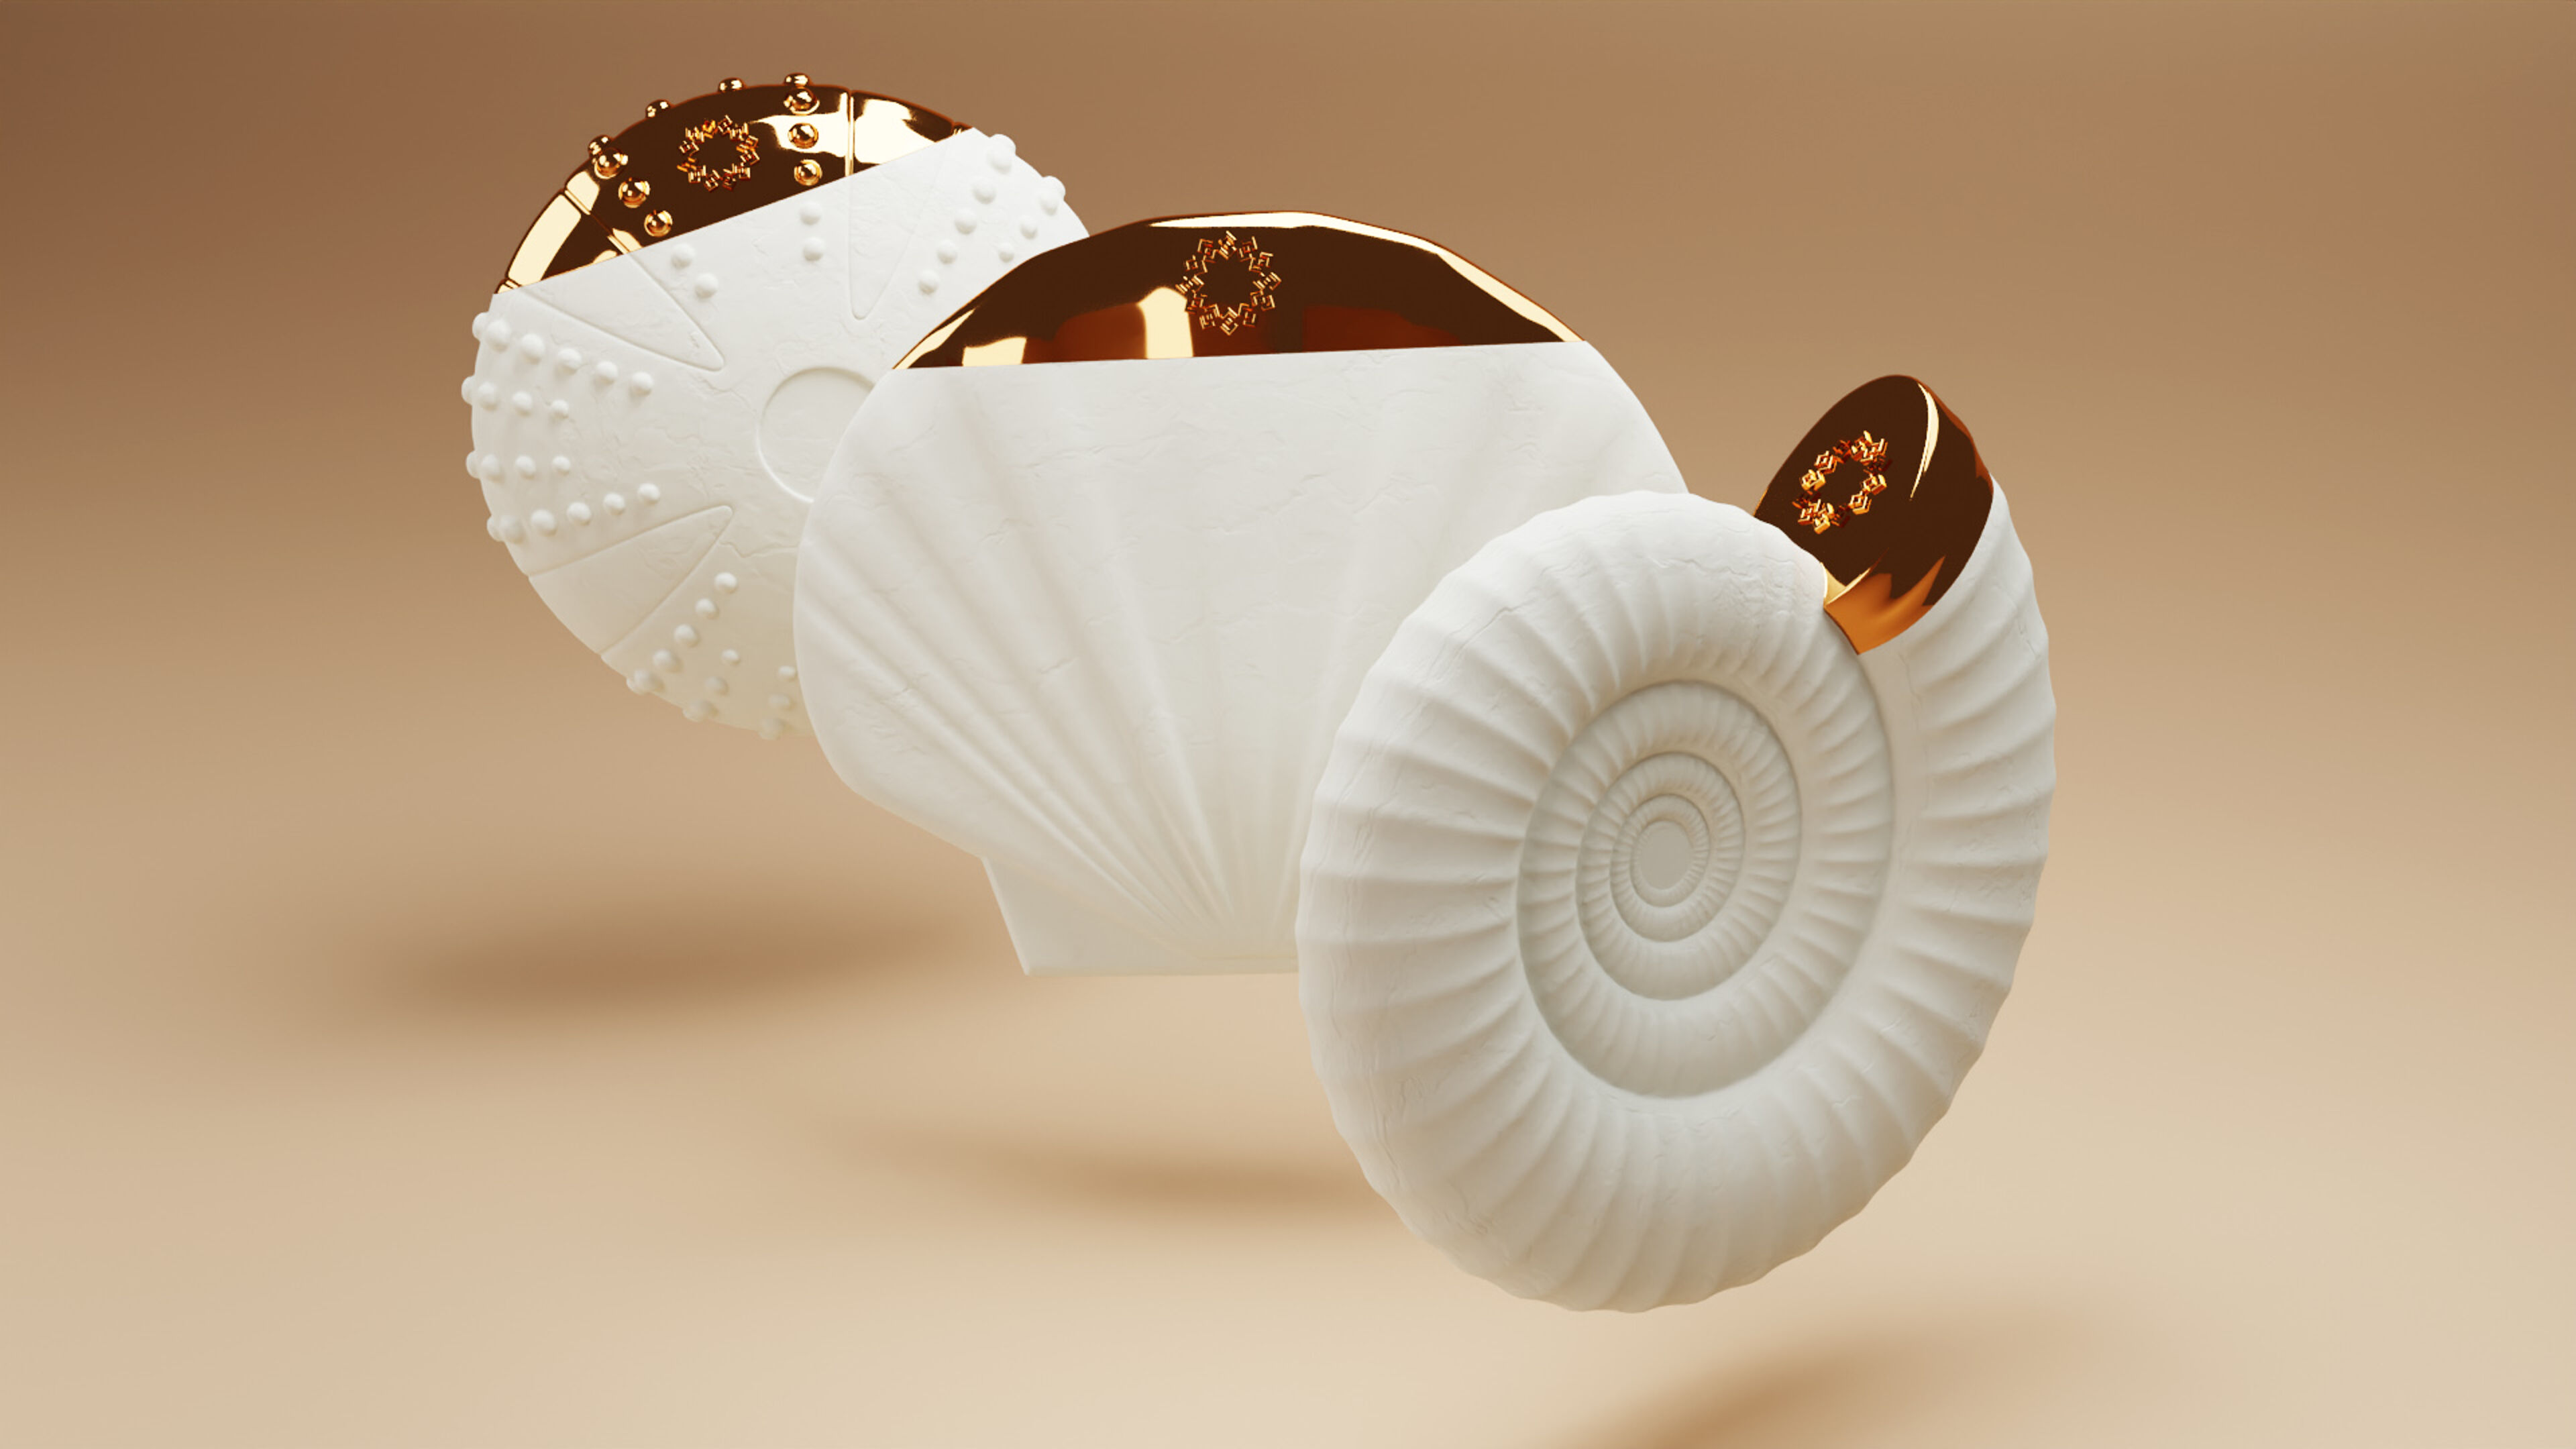 A conceptual artwork of three seashells with intricate golden accents, evoking a blend of nature and luxury.